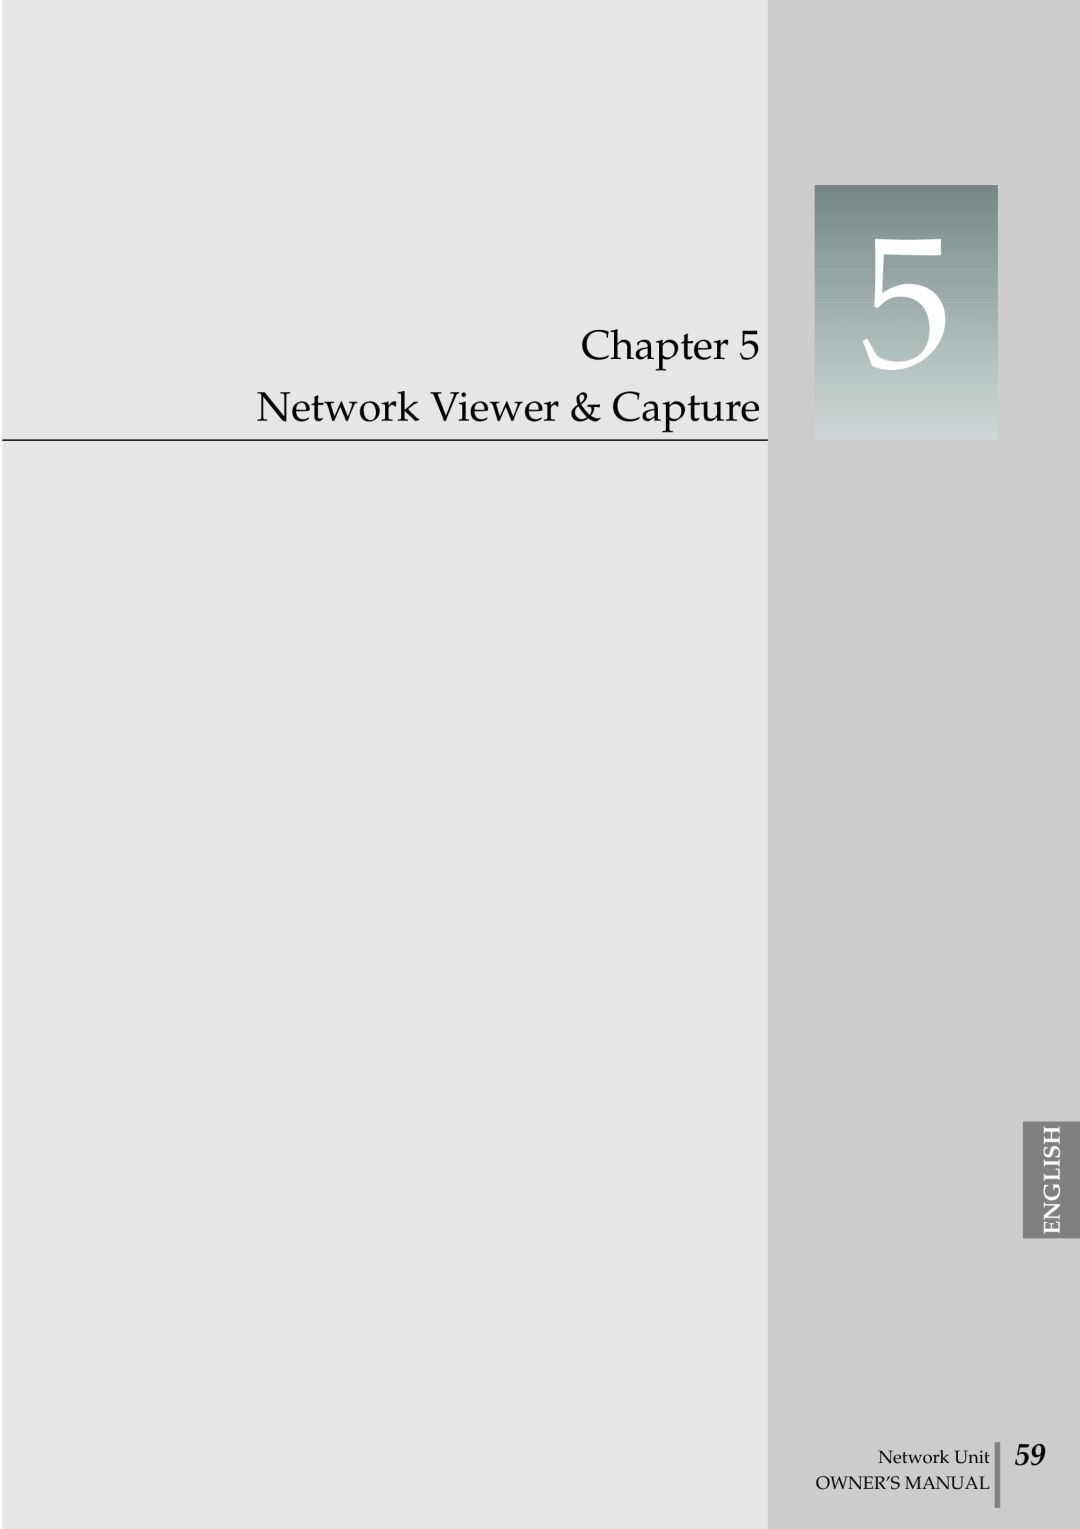 Eiki PjNET-20 owner manual Network Viewer & Capture, Chapter, English, Network Unit OWNER’S MANUAL 